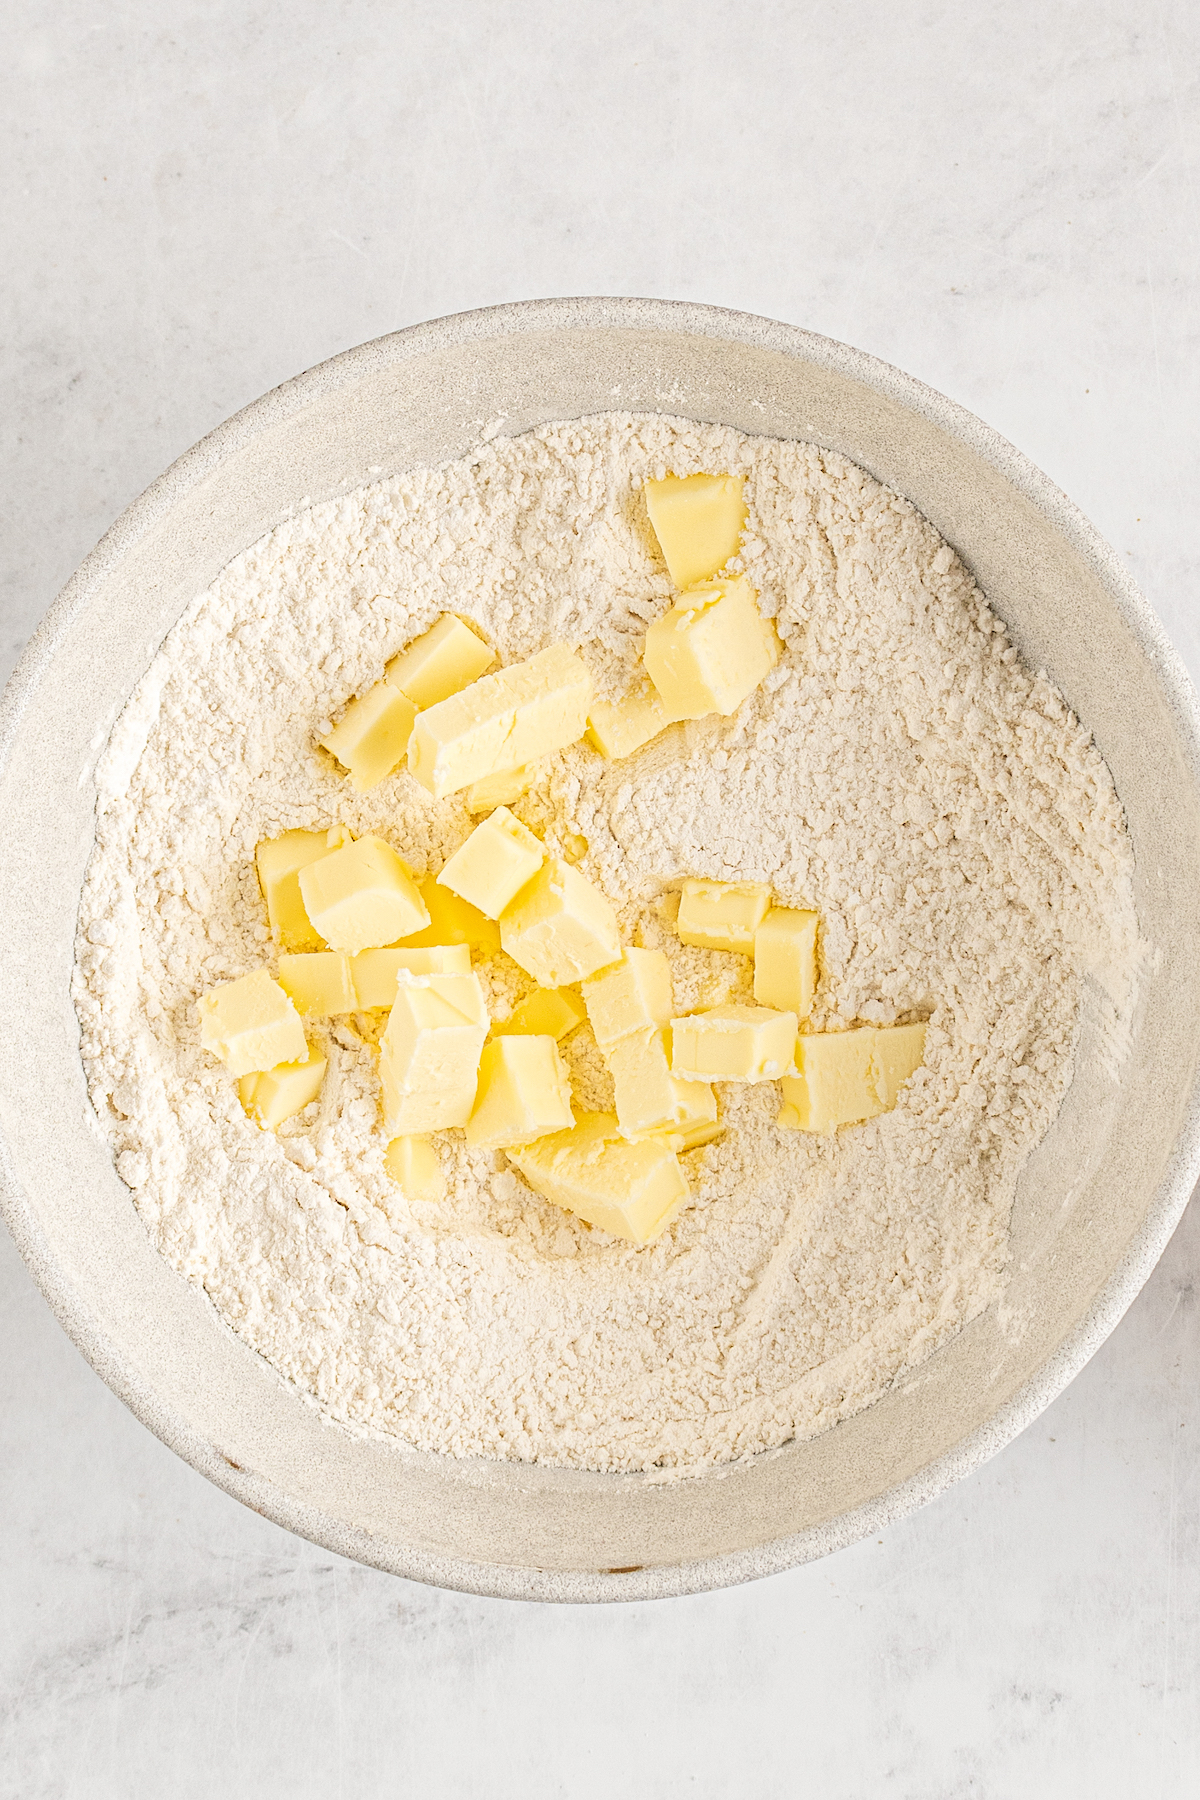 Chopped butter in a bowl of dry ingredients.